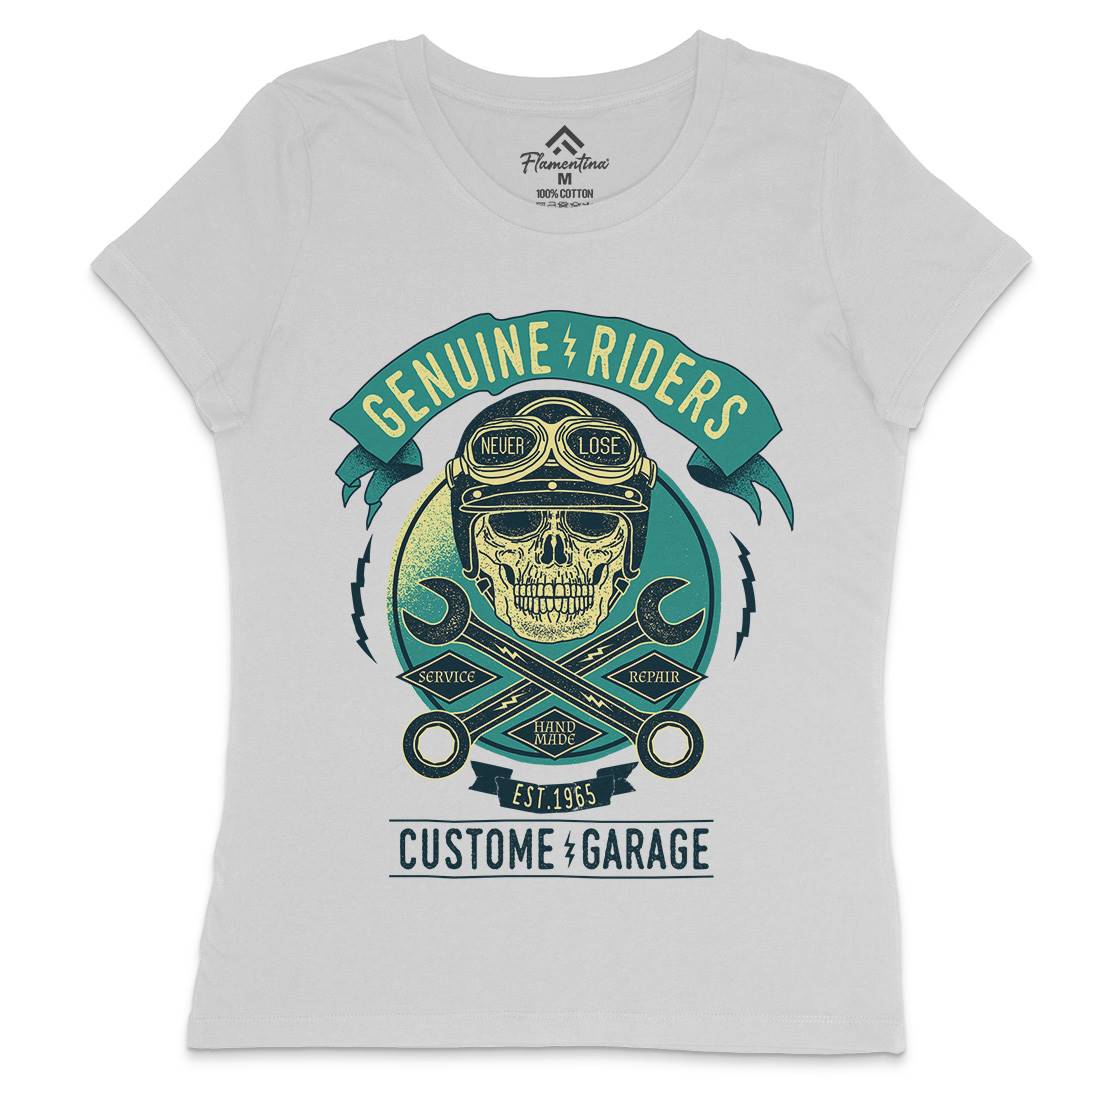 Genuine Riders Womens Crew Neck T-Shirt Motorcycles A984